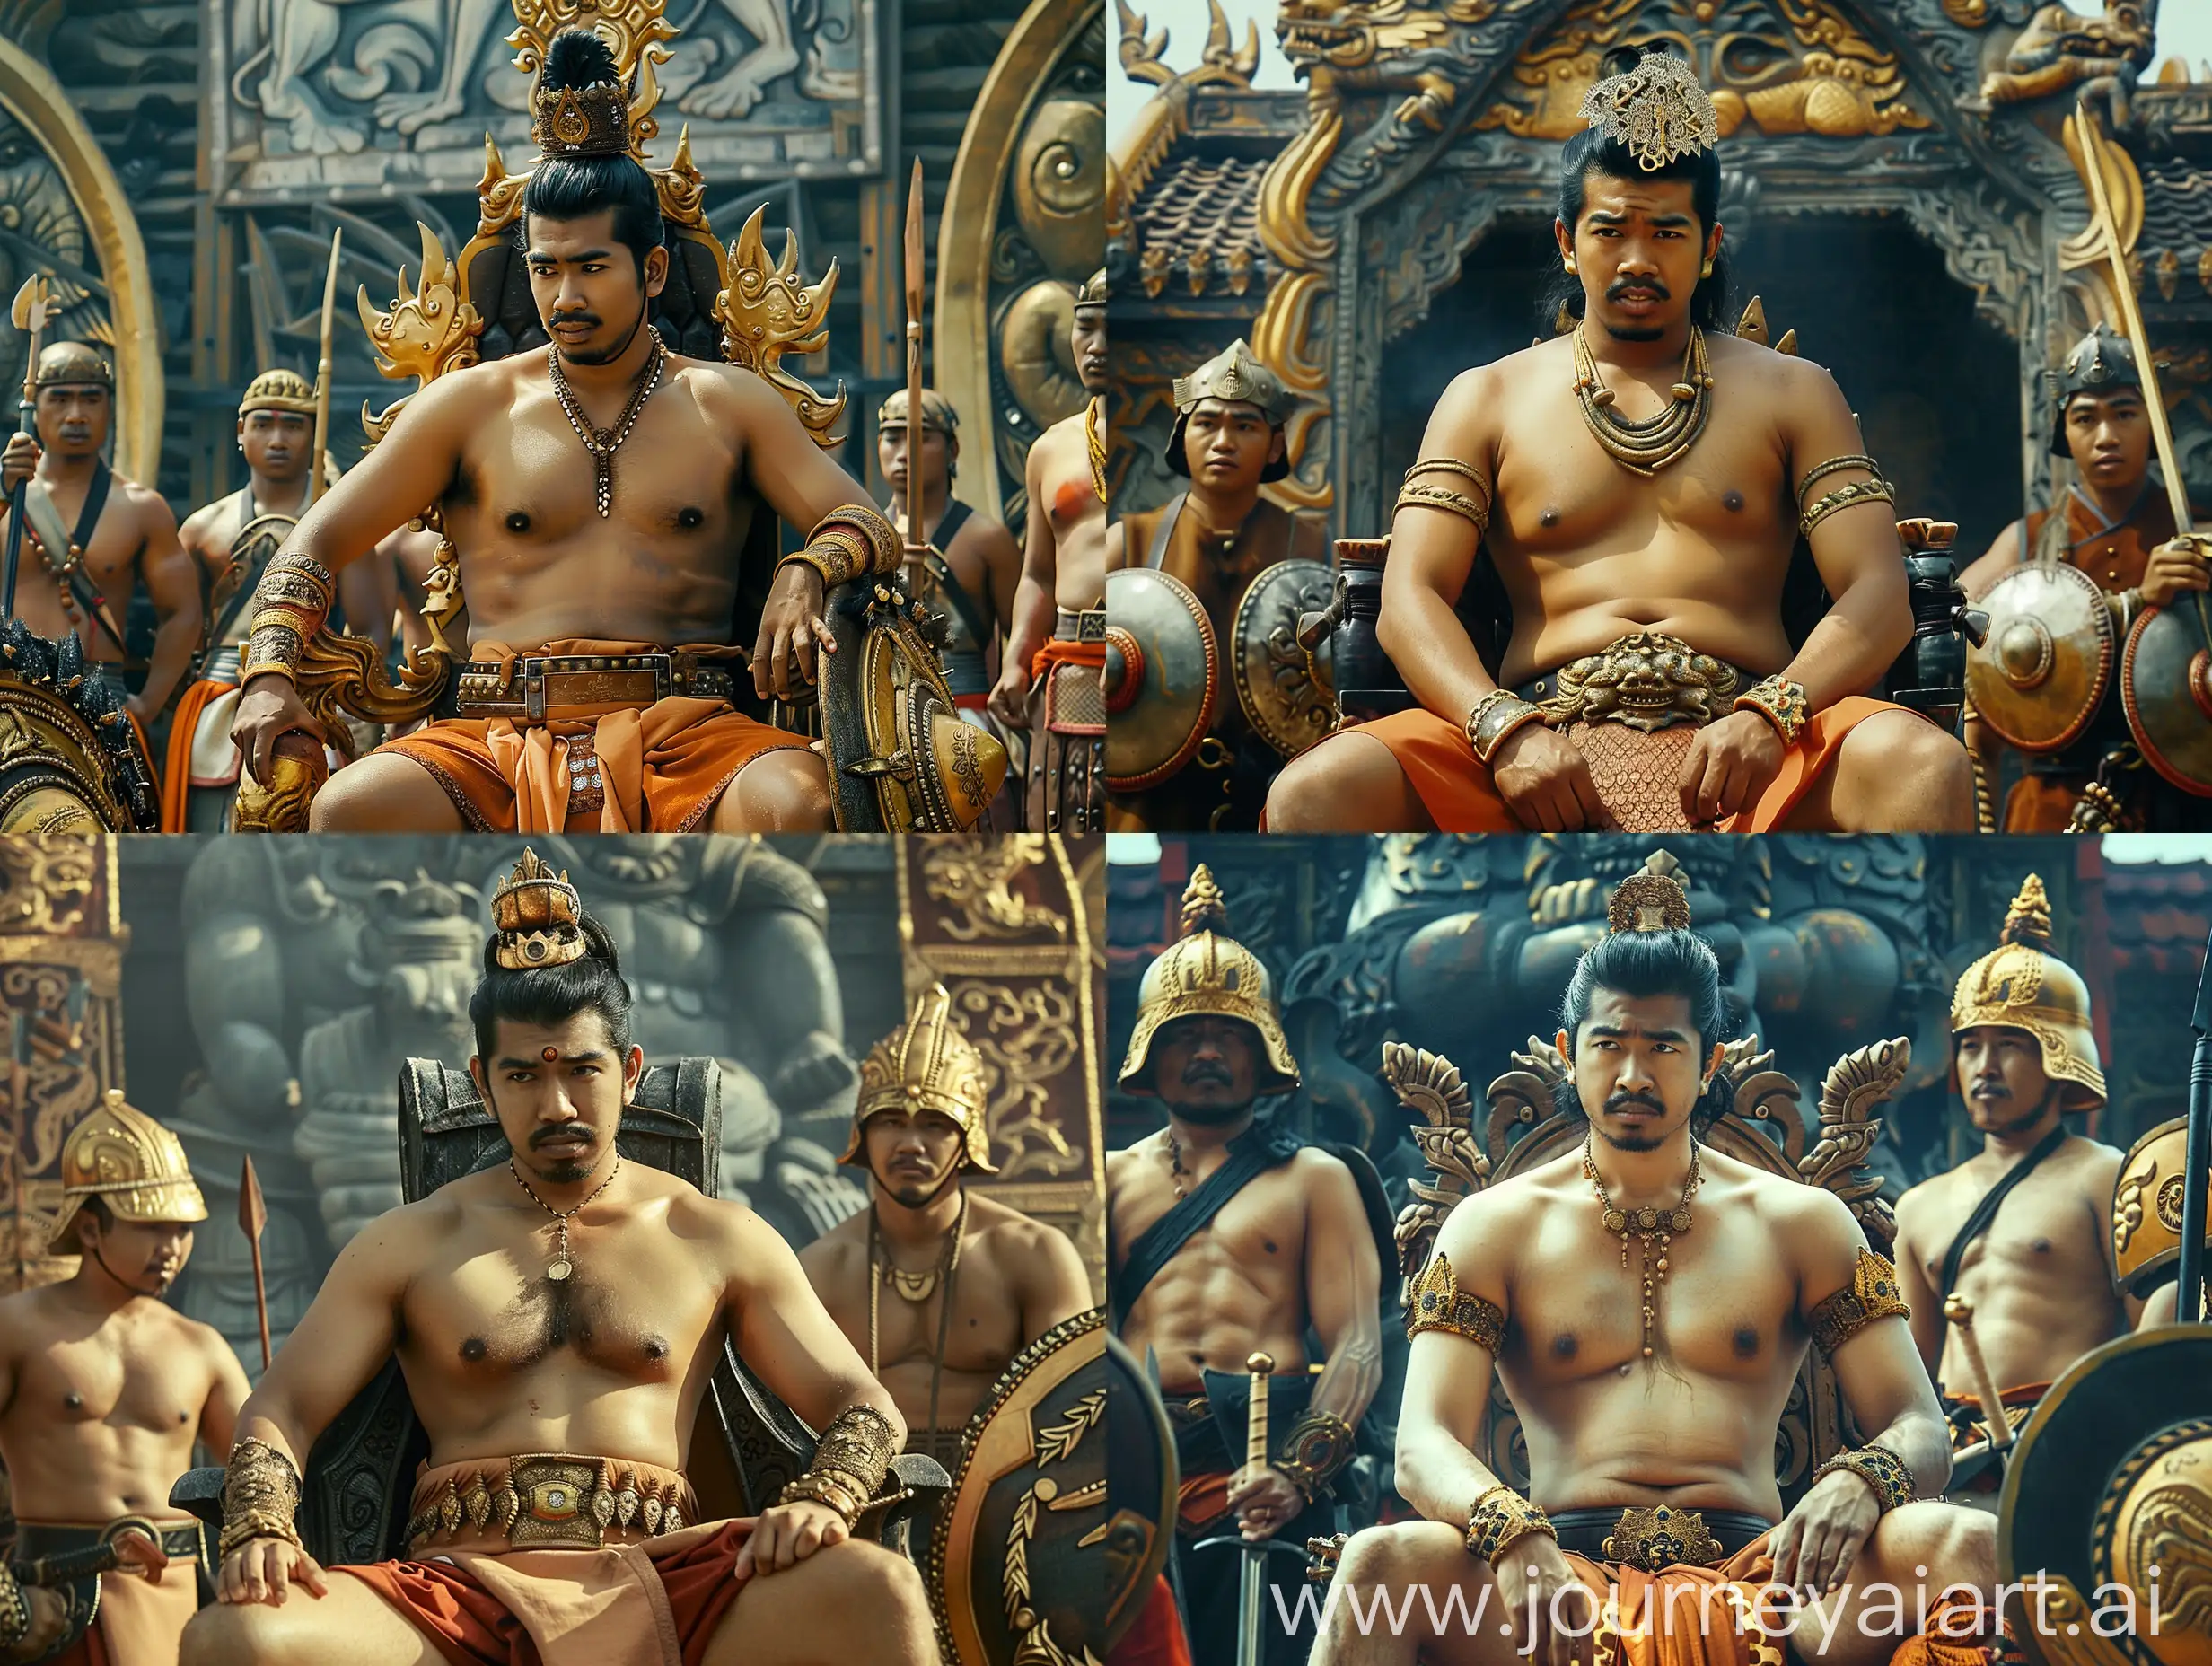 Movie scene, The king of the Majapahit kingdom, Hayam Wuruk, sturdy body, without a shirt, hair tied in a bun, wearing decorations on his head and arms, sitting on the throne looking deep in thought.  his soldiers were dressed in war clothes without shirts, carrying weapons and shields, standing guard beside him, full body shot.